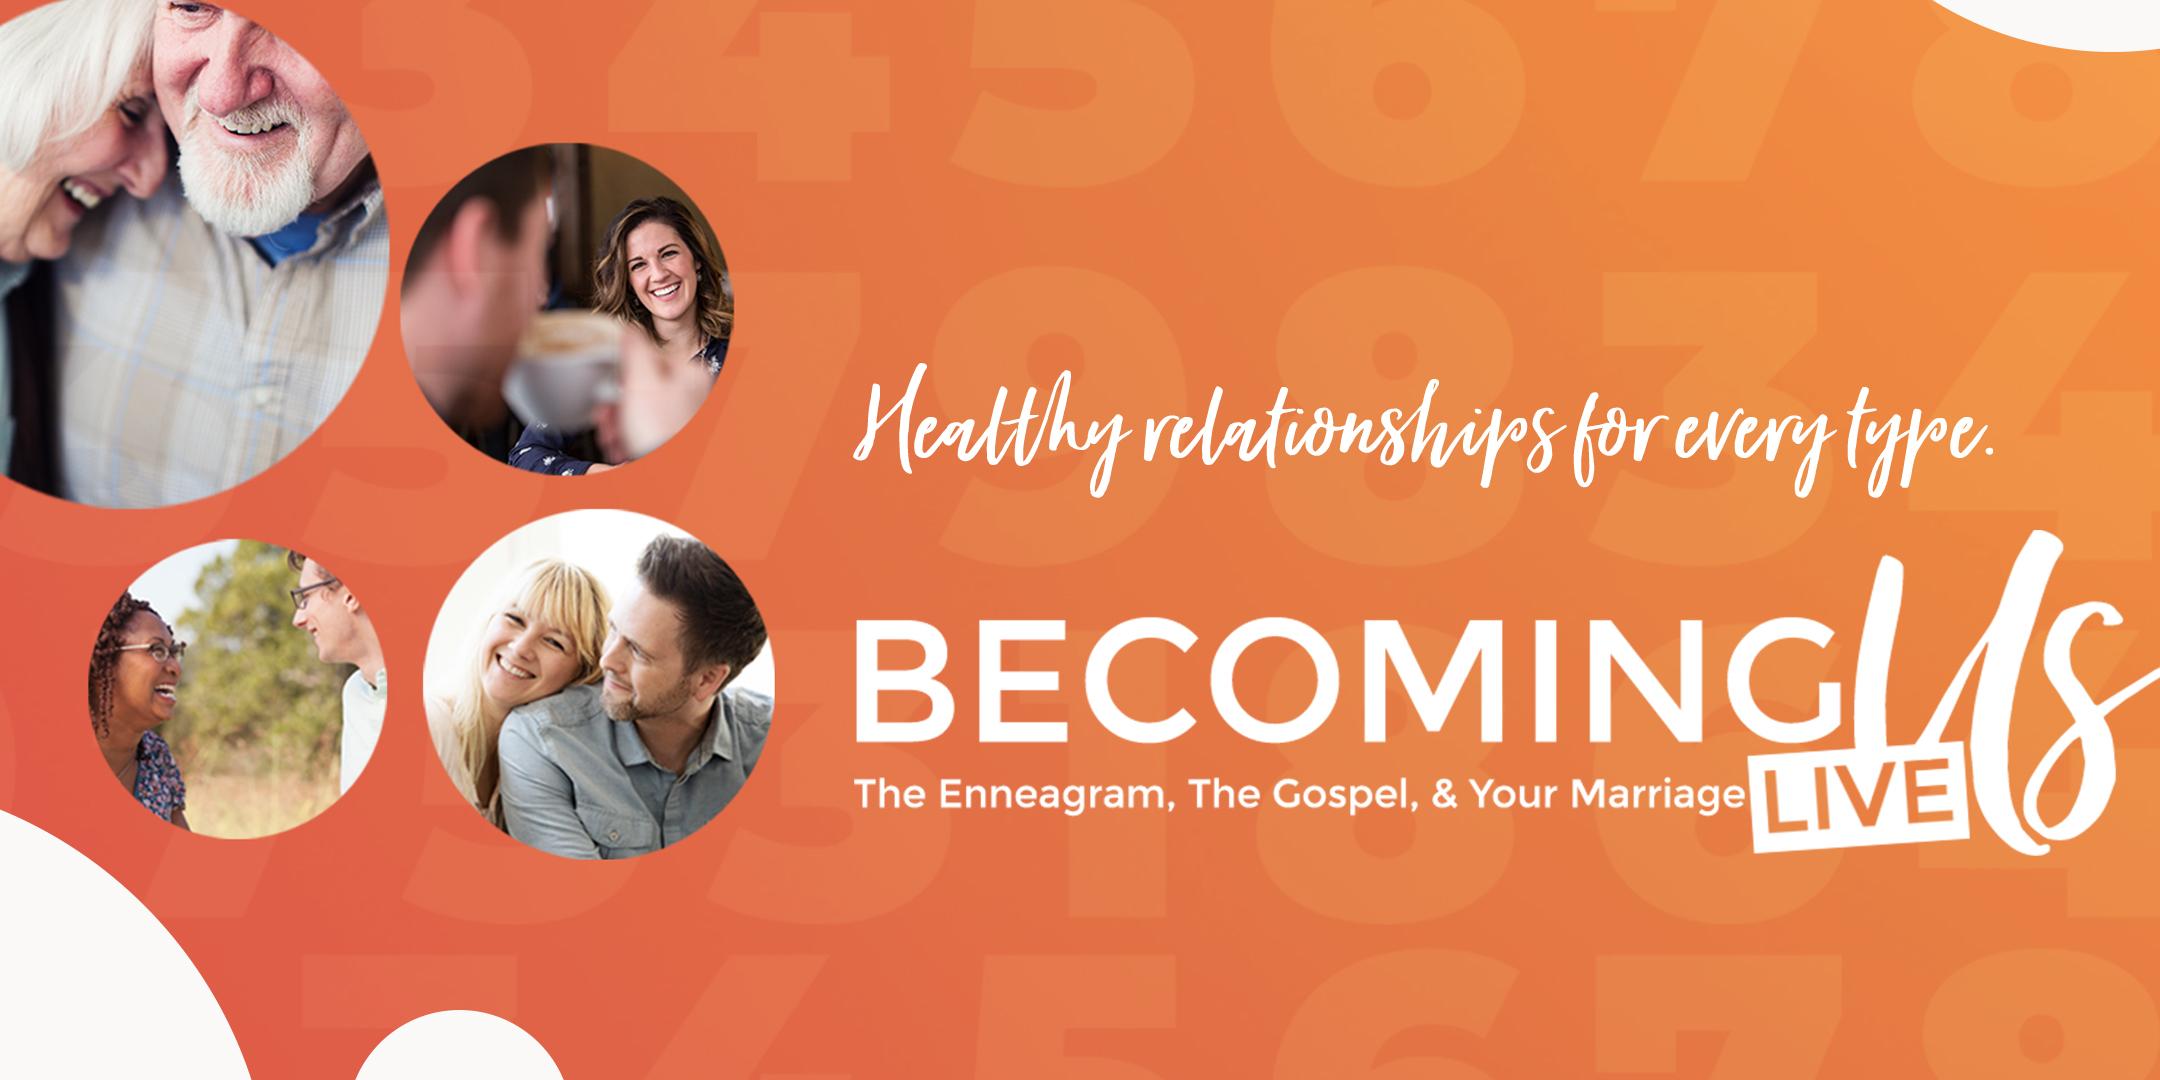 BECOMING US: The Enneagram, The Gospel, & Your Marriage LIVE